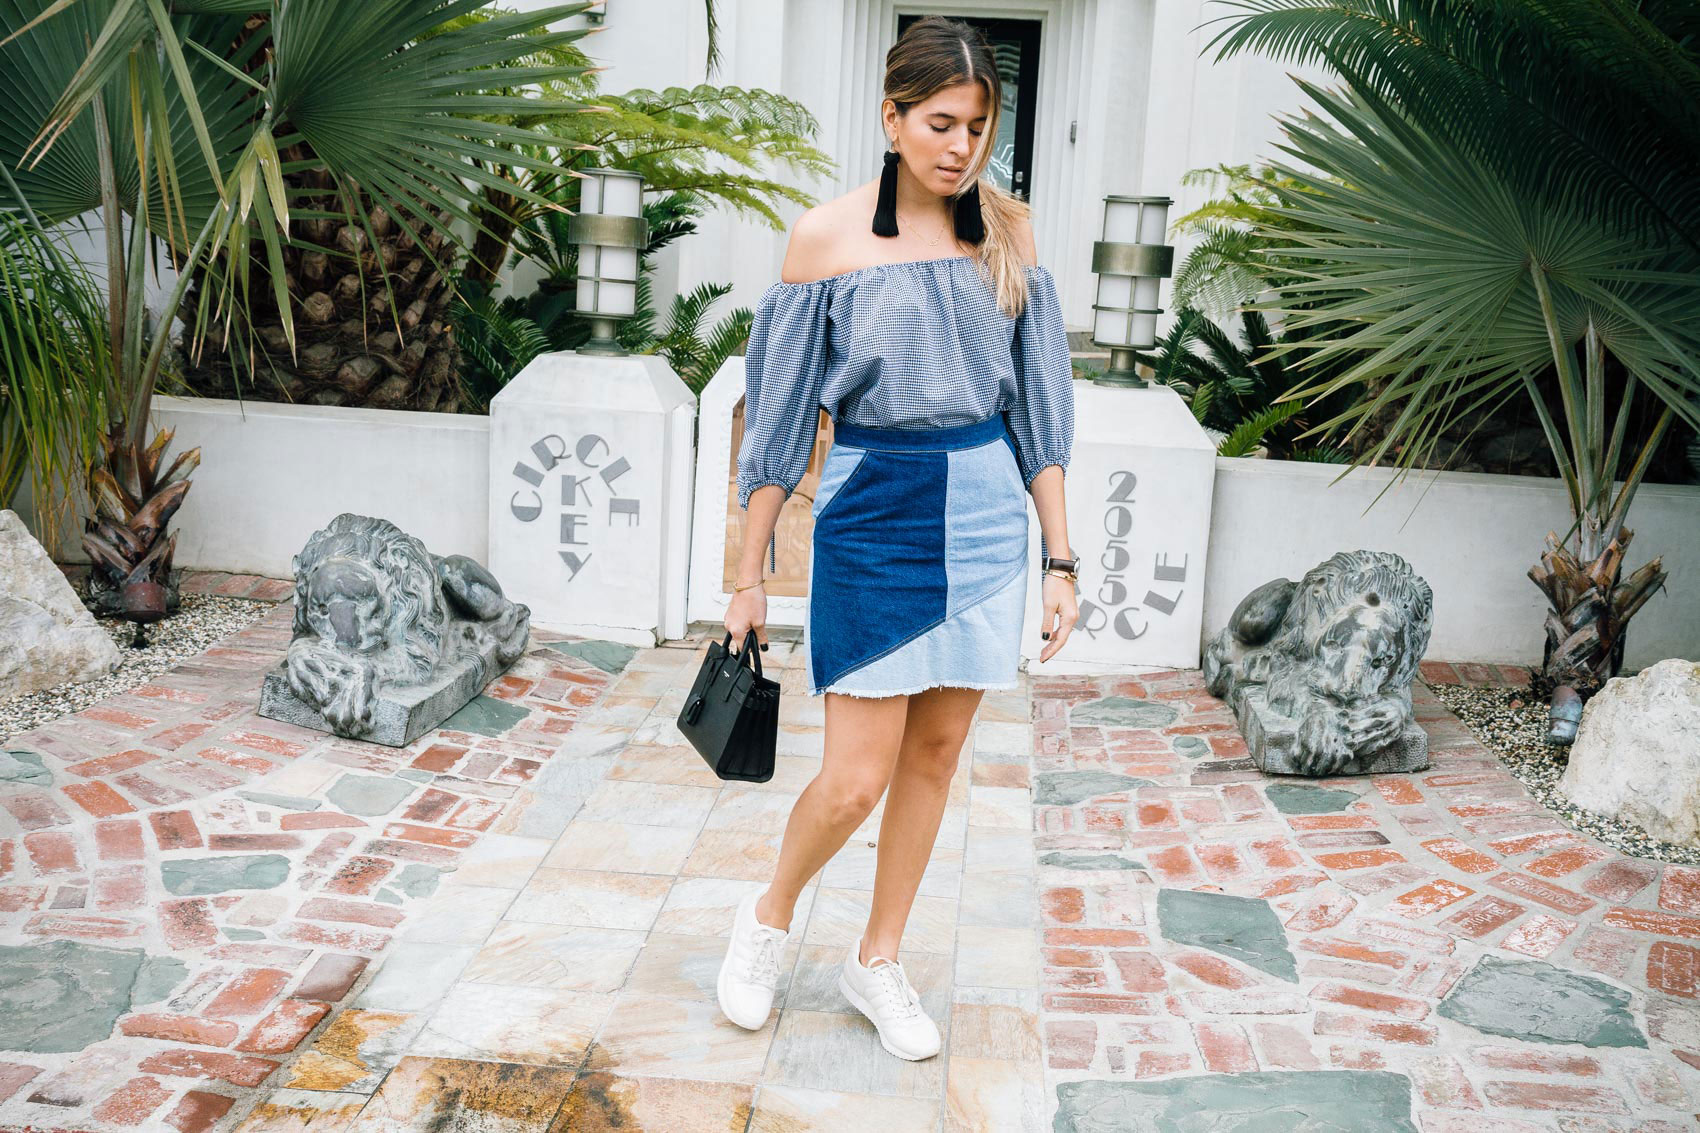 Maristella shows off how to wear sneakers with a skirt for a chic yet casual outfit